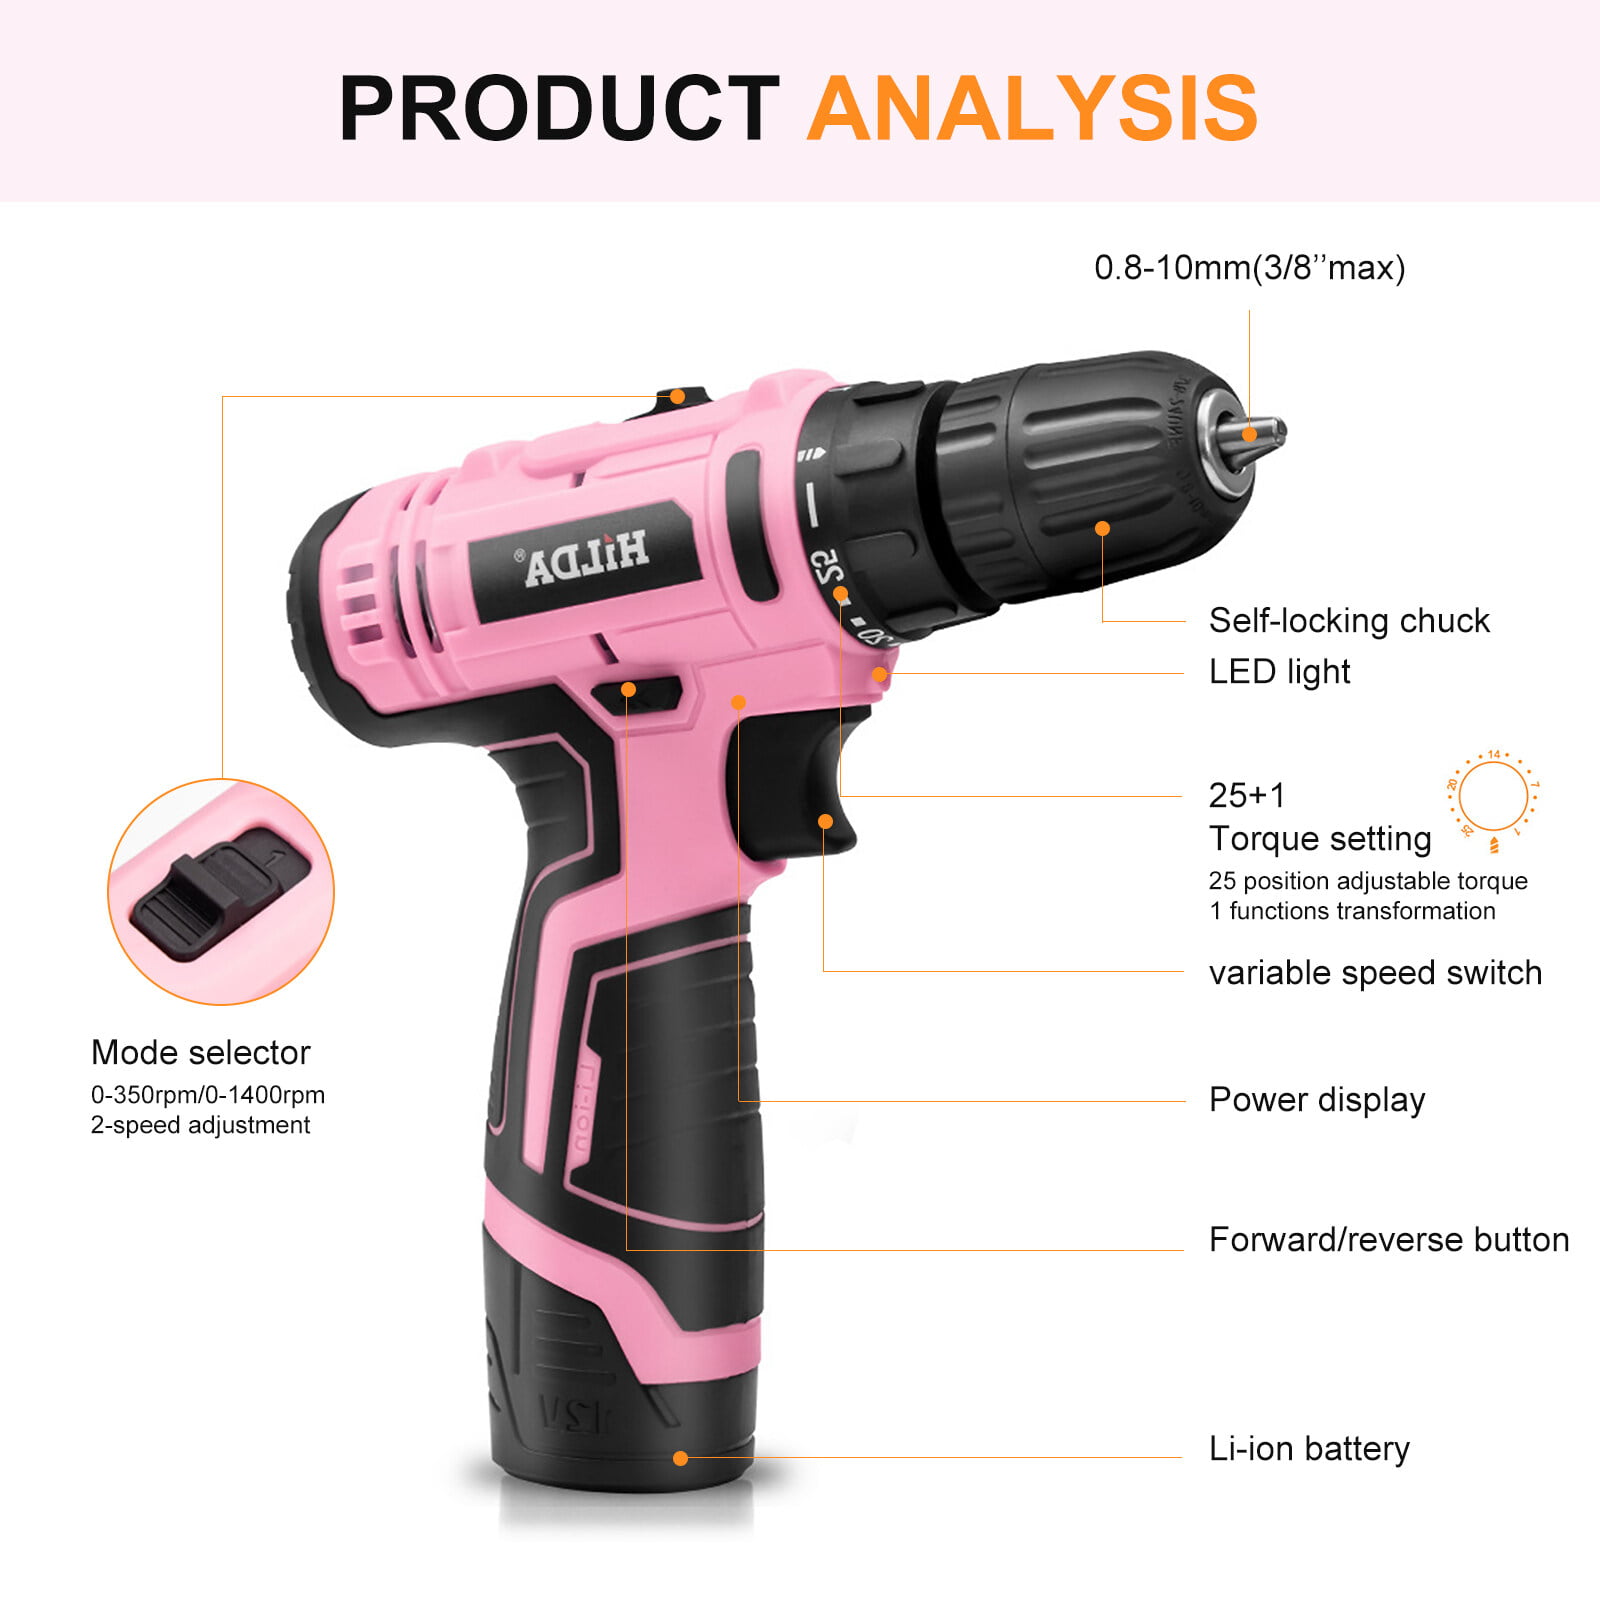 HiLDA Home Wireless 12V Lithium Battery Electric Impact Hand Drill -  Martview